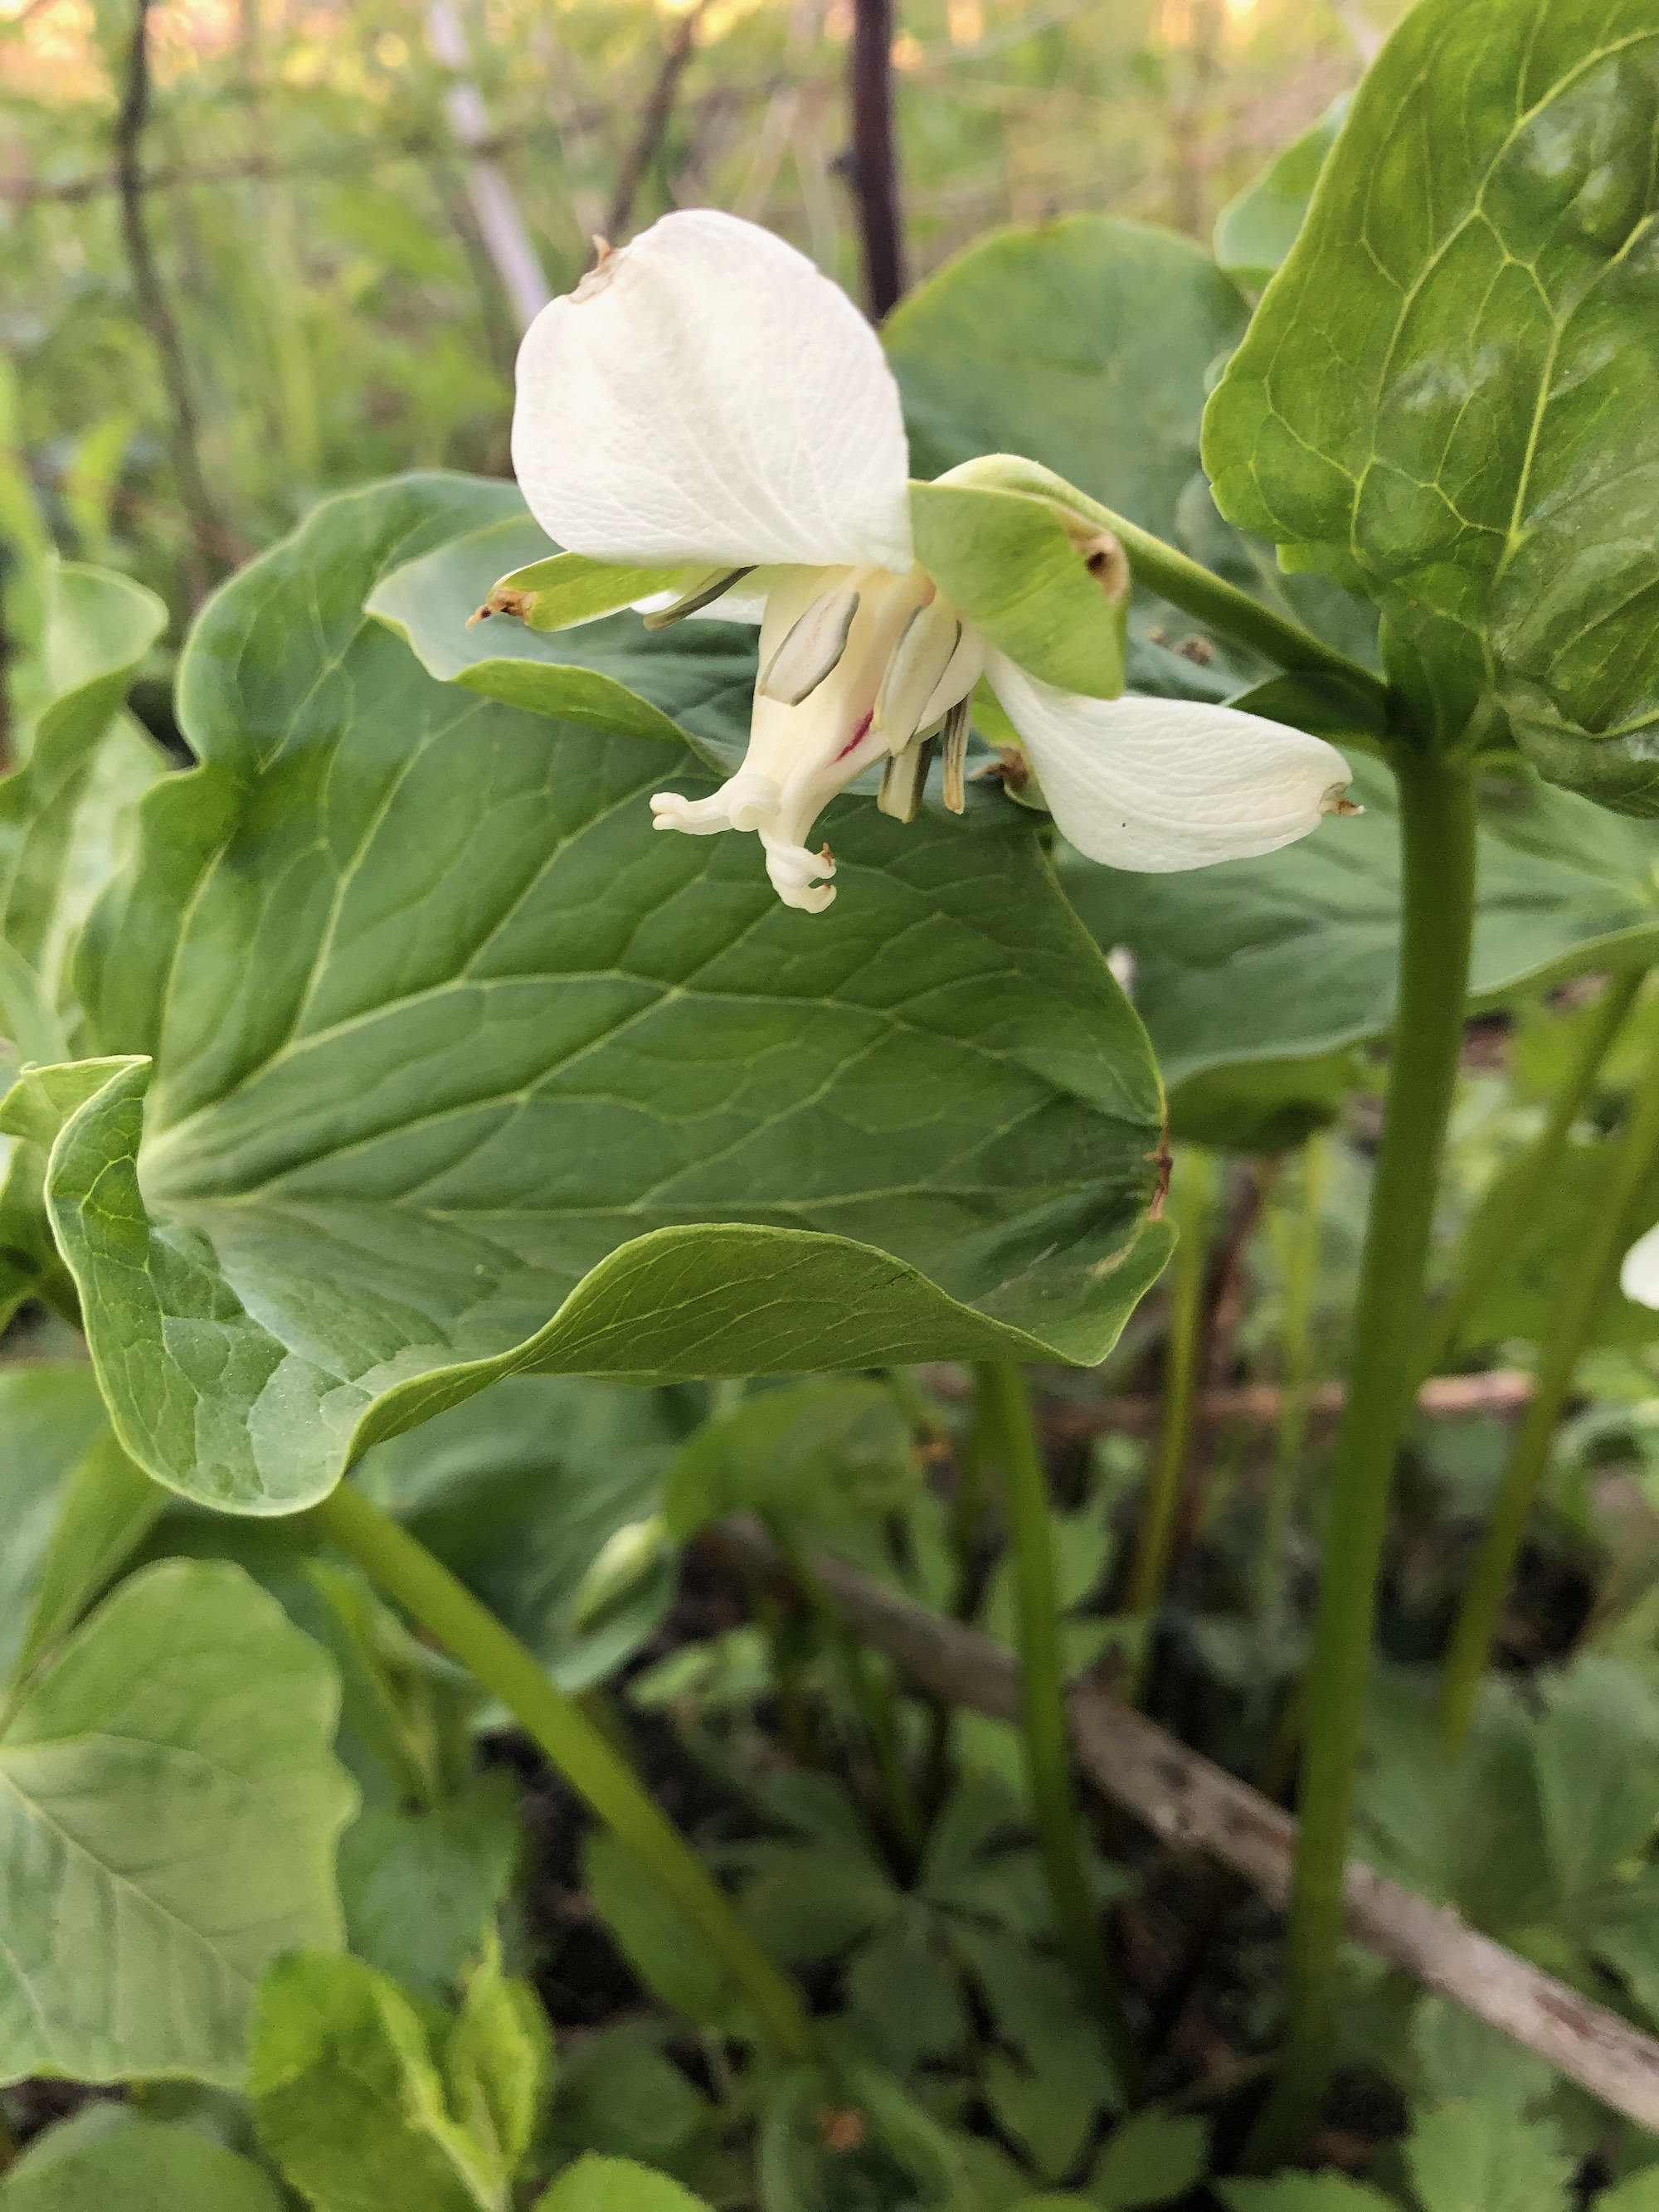 Drooping Trillium near Council Ring Spring in Madison, Wisconsin on May 12, 2021.